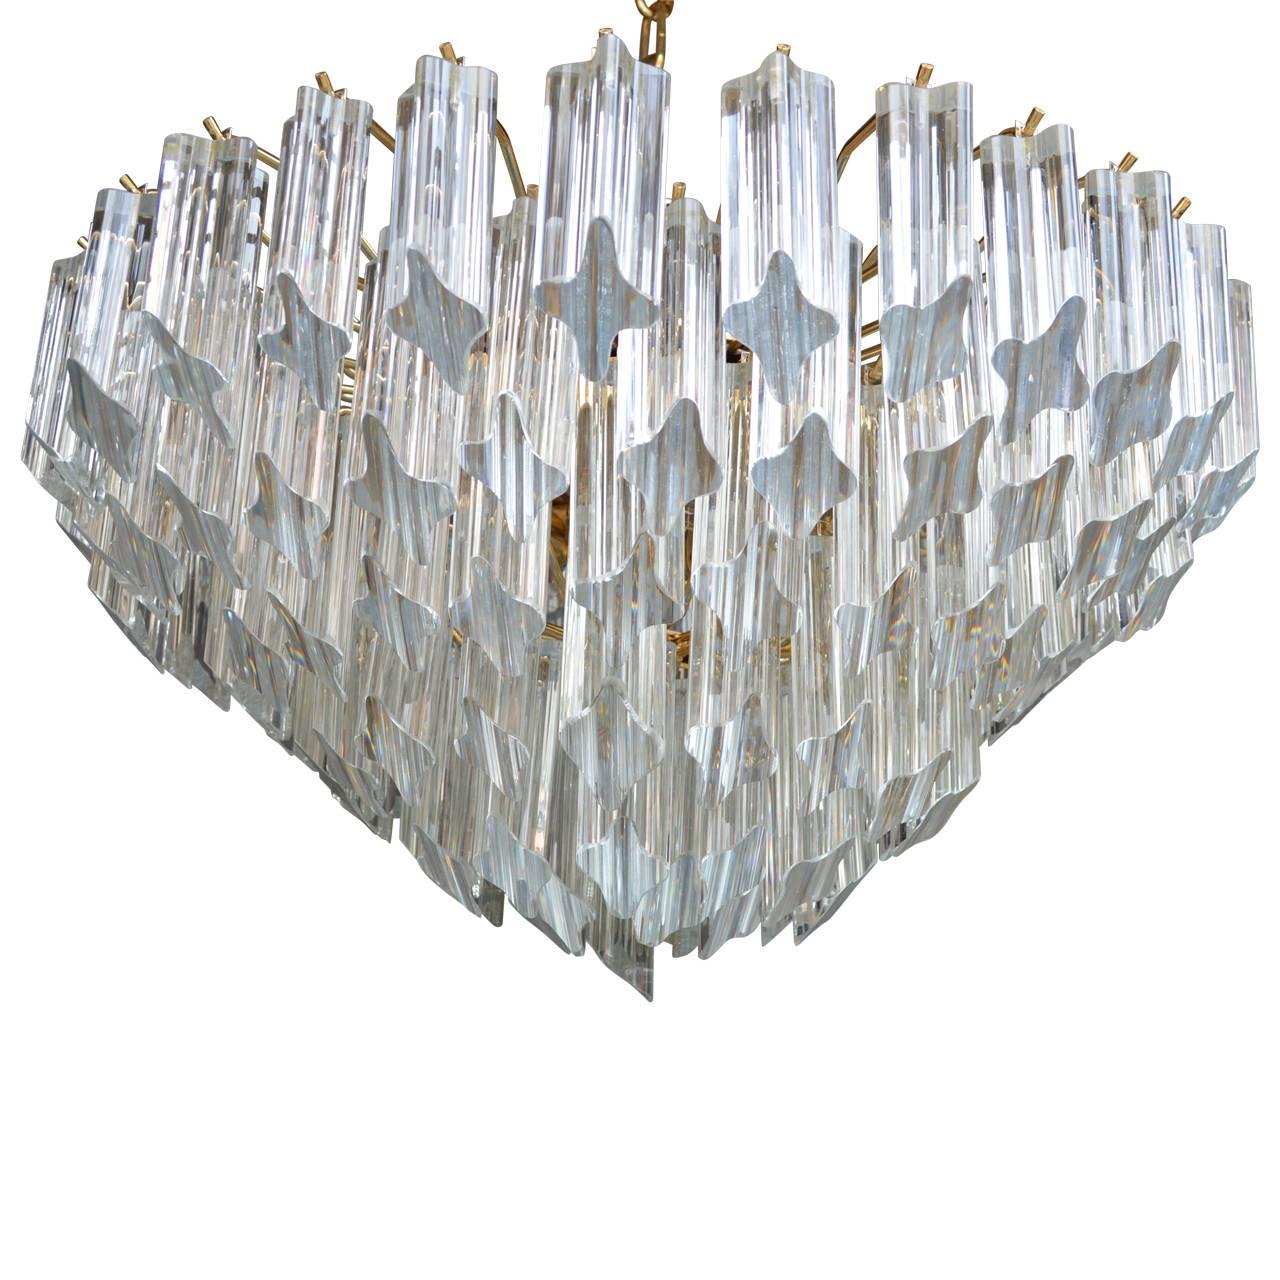 Stunning Venini multi-tiered prisms chandelier. Featuring six-tier Quatro Punta angle cut crystals. The frame is a brass plated steel with a 24